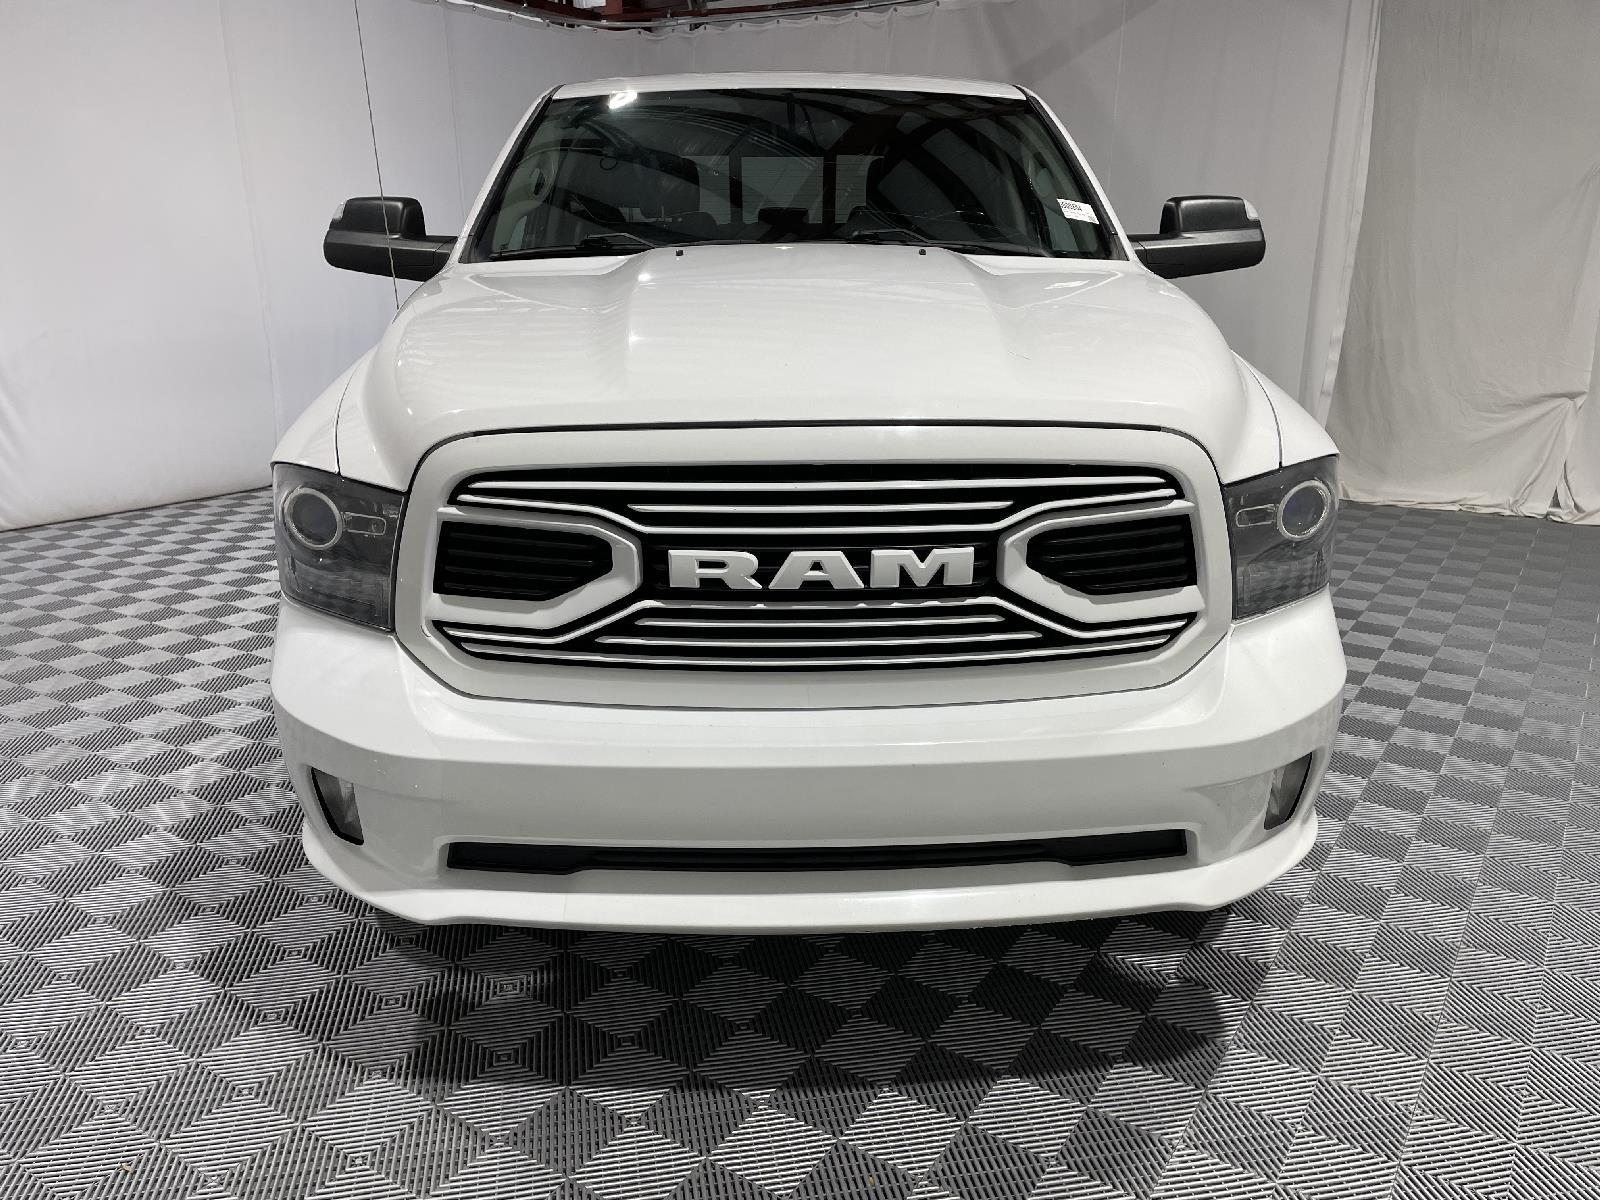 Used 2018 Ram 1500 Sport Crew Cab Truck for sale in St Joseph MO